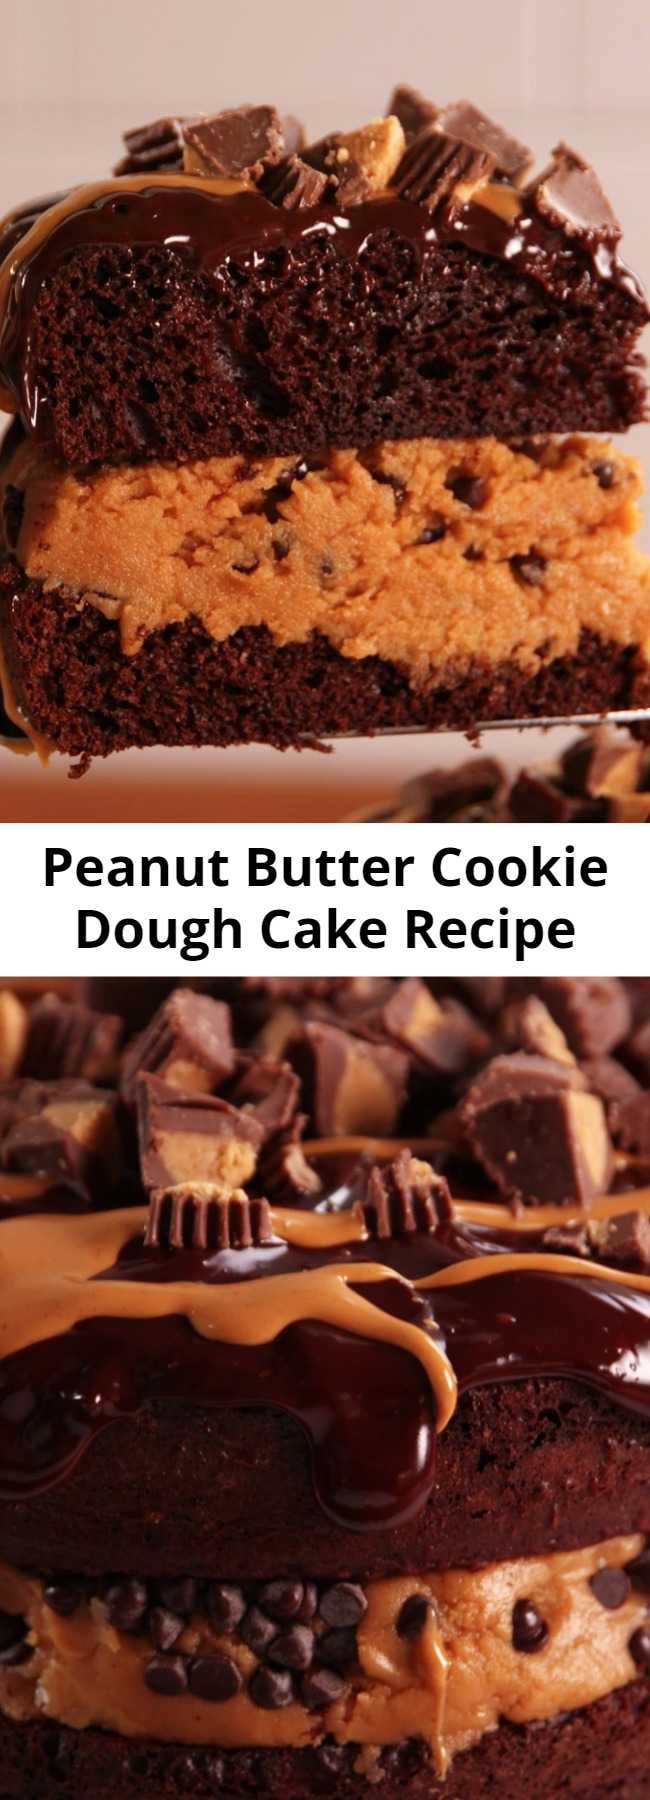 Peanut Butter Cookie Dough Cake Recipe - If you like shoveling mounds of cookie dough into your face, you're going to love this cake. This mashup cake squeezes layers of peanut butter cookie dough in between layers of chocolate cake and it's as amazing as it sounds.